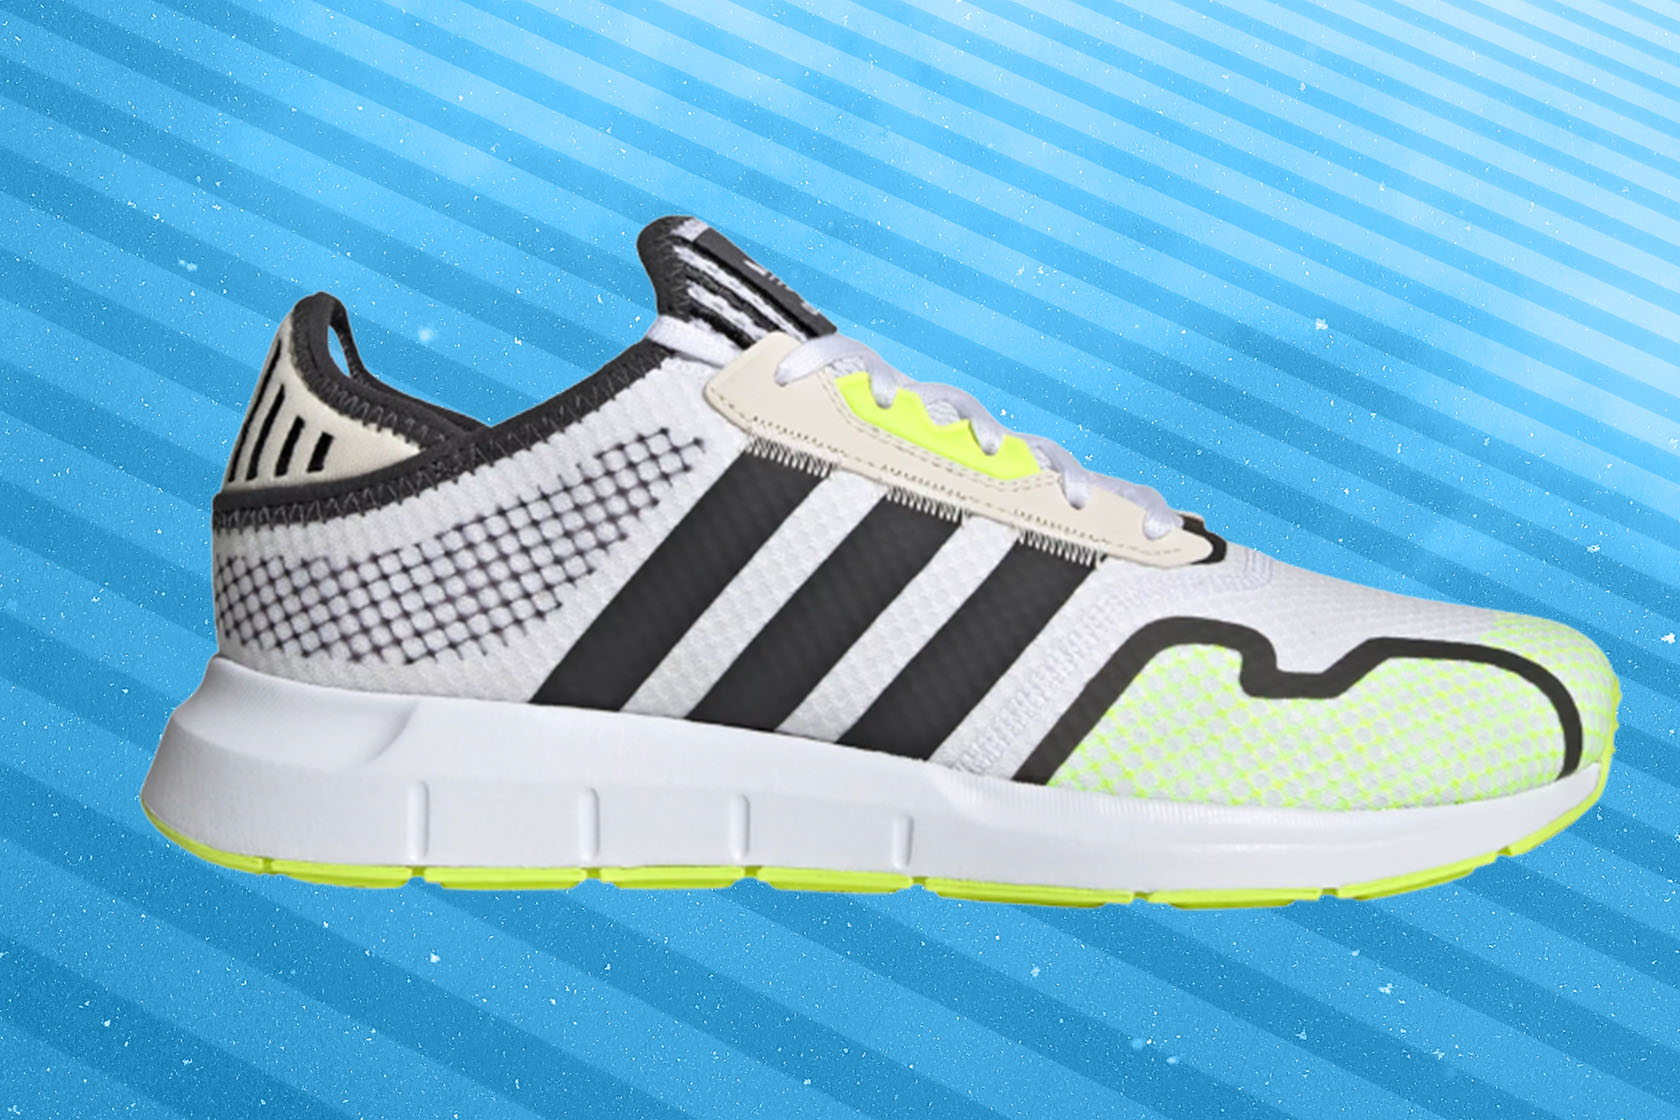 These adidas Men's Swift Run shoes are on $32 at Sporting Goods